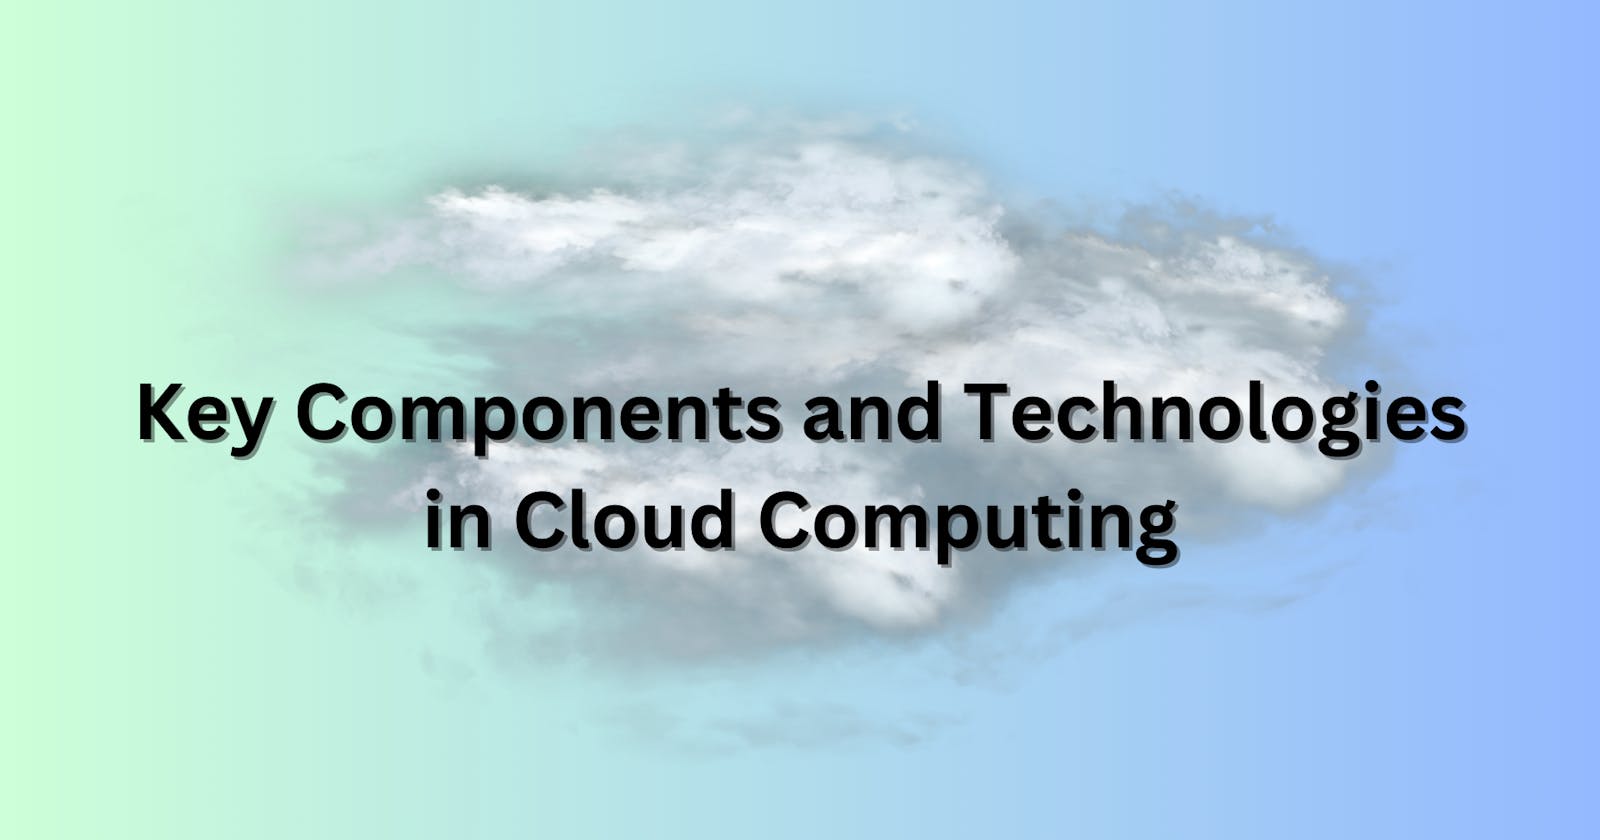 Key Components and Technologies in Cloud Computing